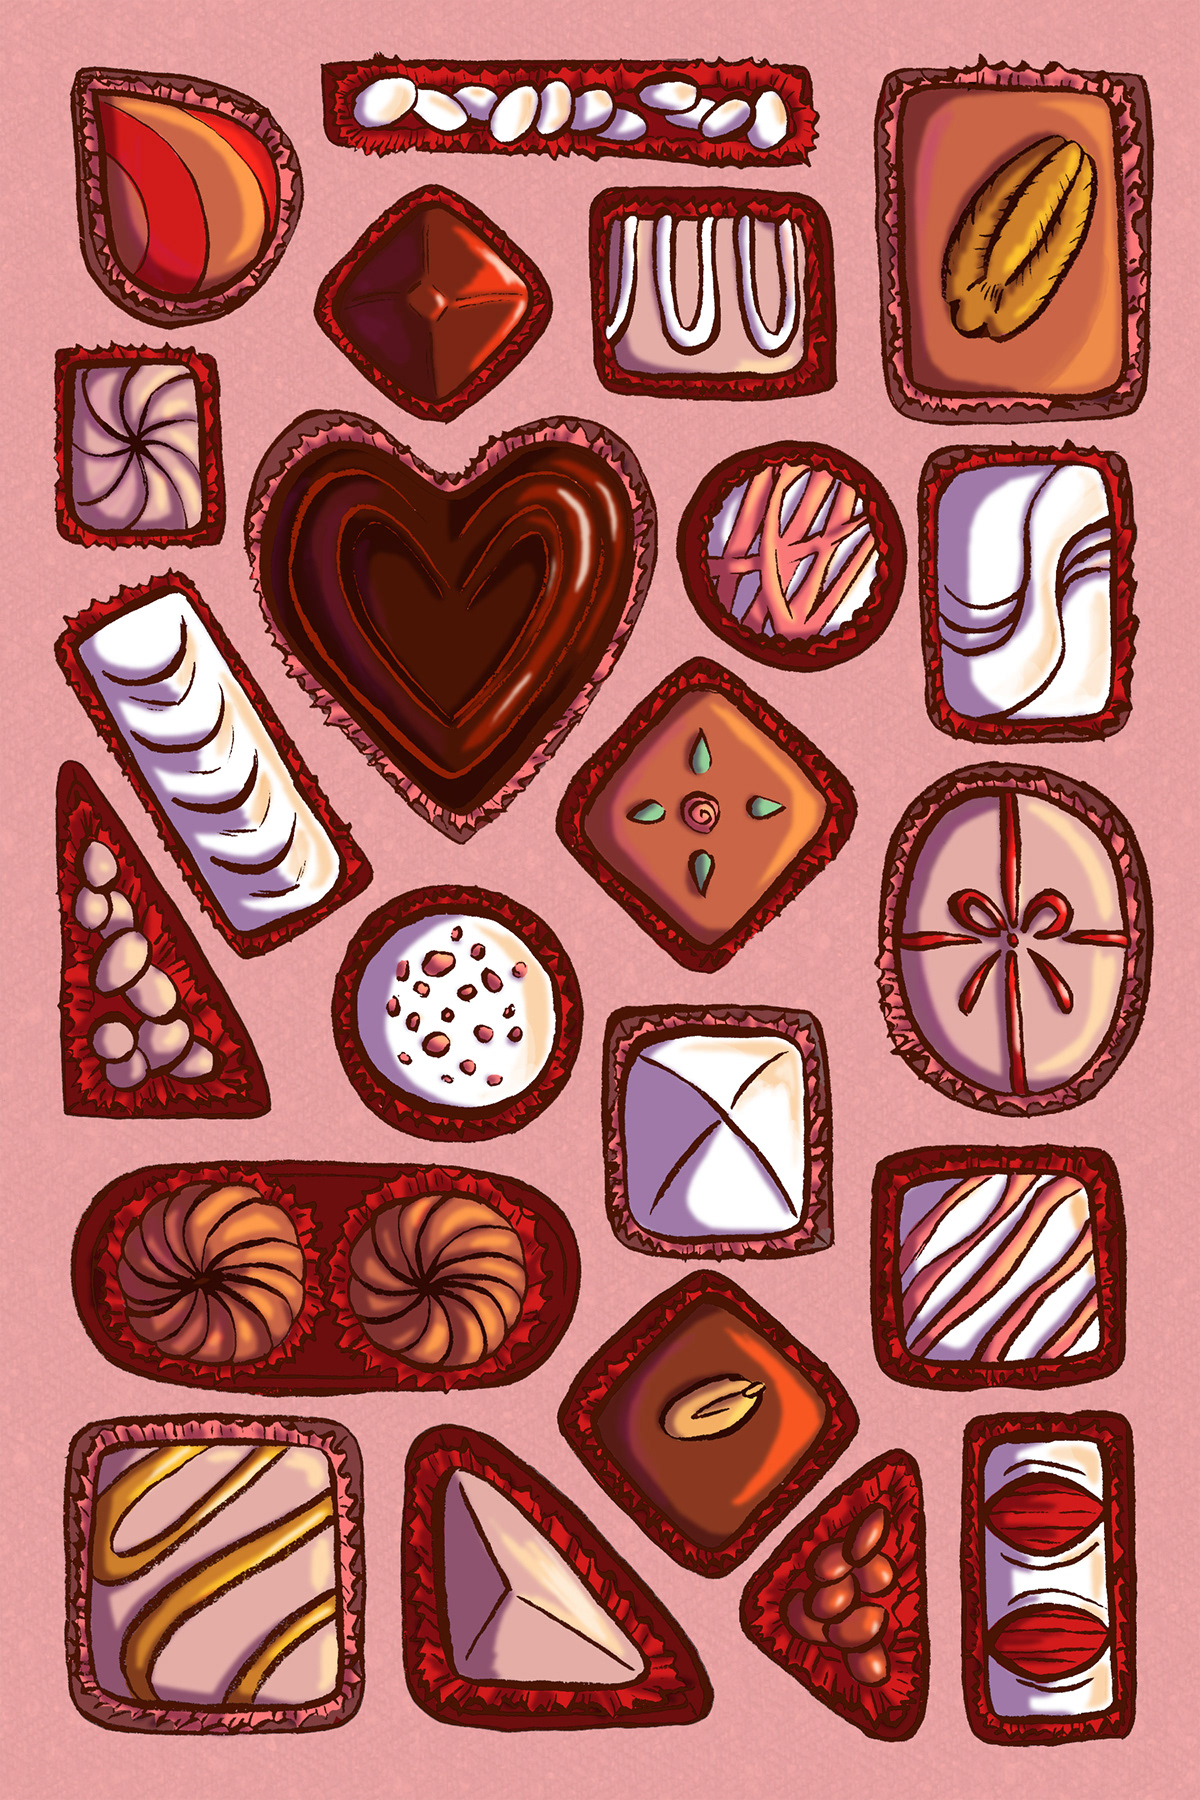 cards Valentine's Day chocolate Love couples Sweets dessert box seasonal sugar bow gifts greeting cards